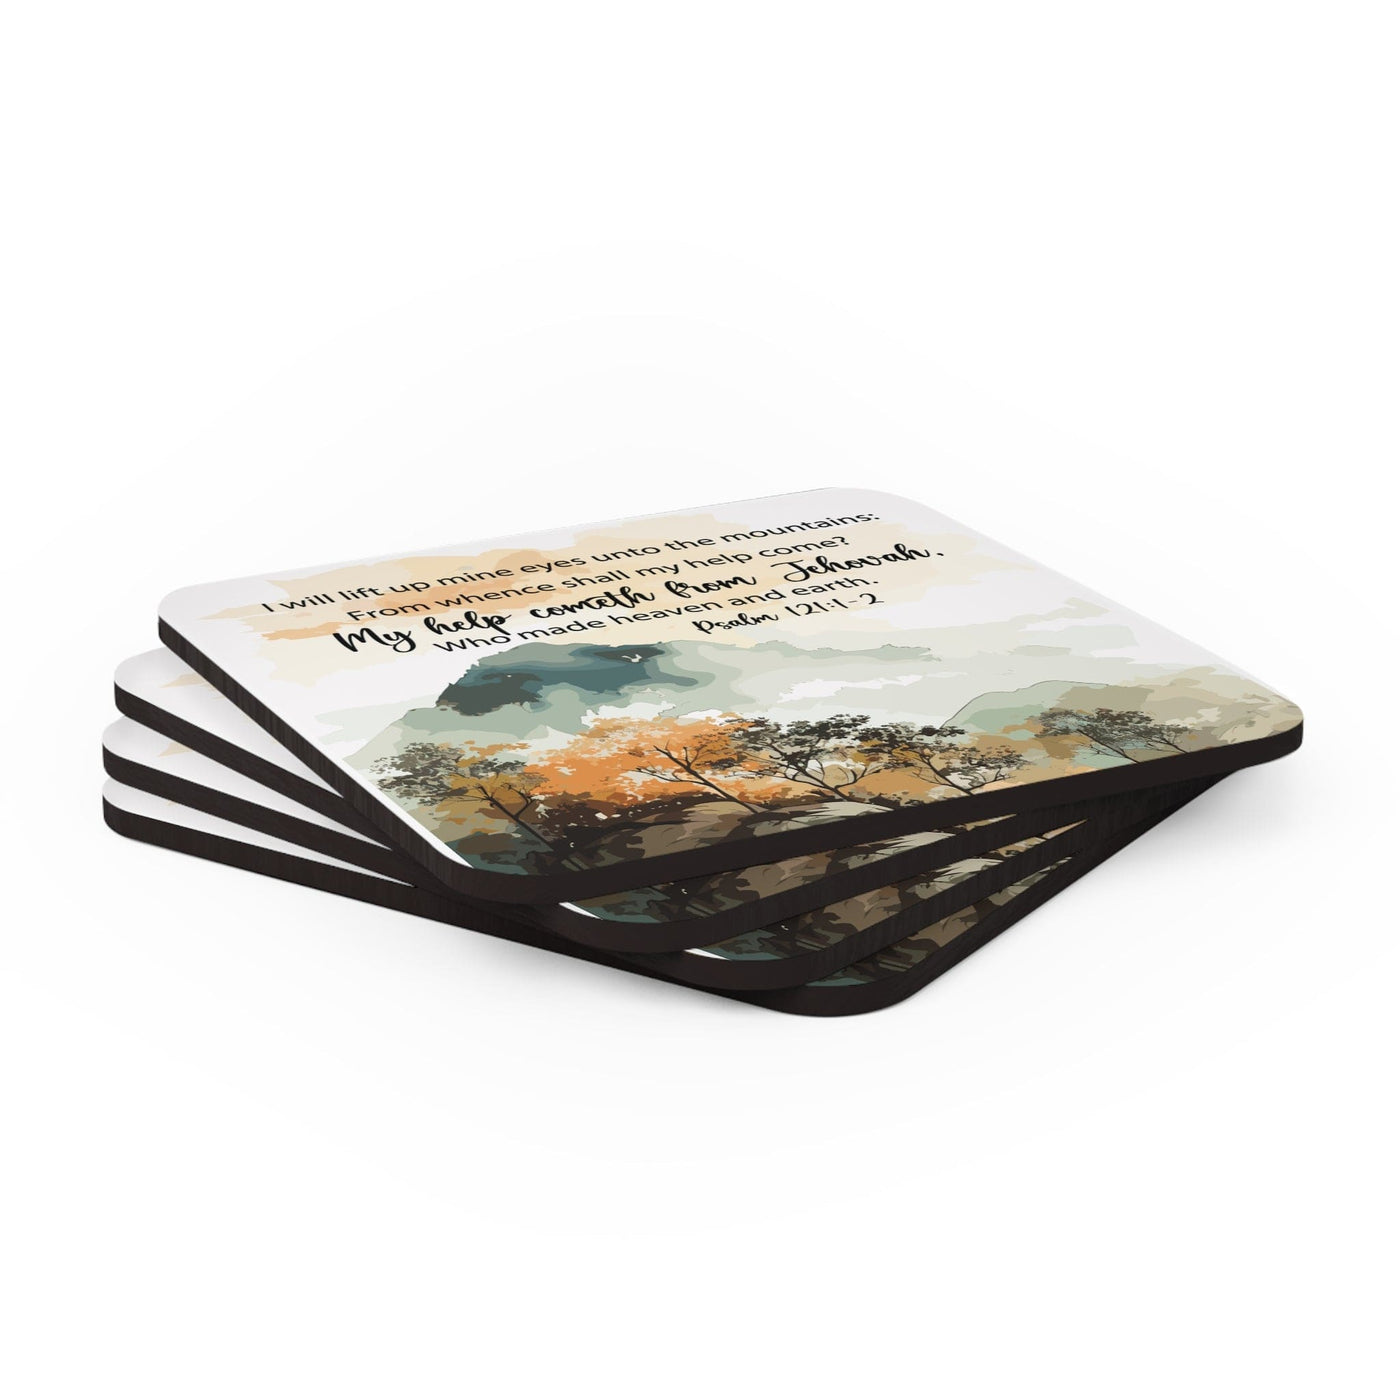 Handcrafted Square Coaster Set Of 4 For Drinks And Cups Psalm 121 My Help